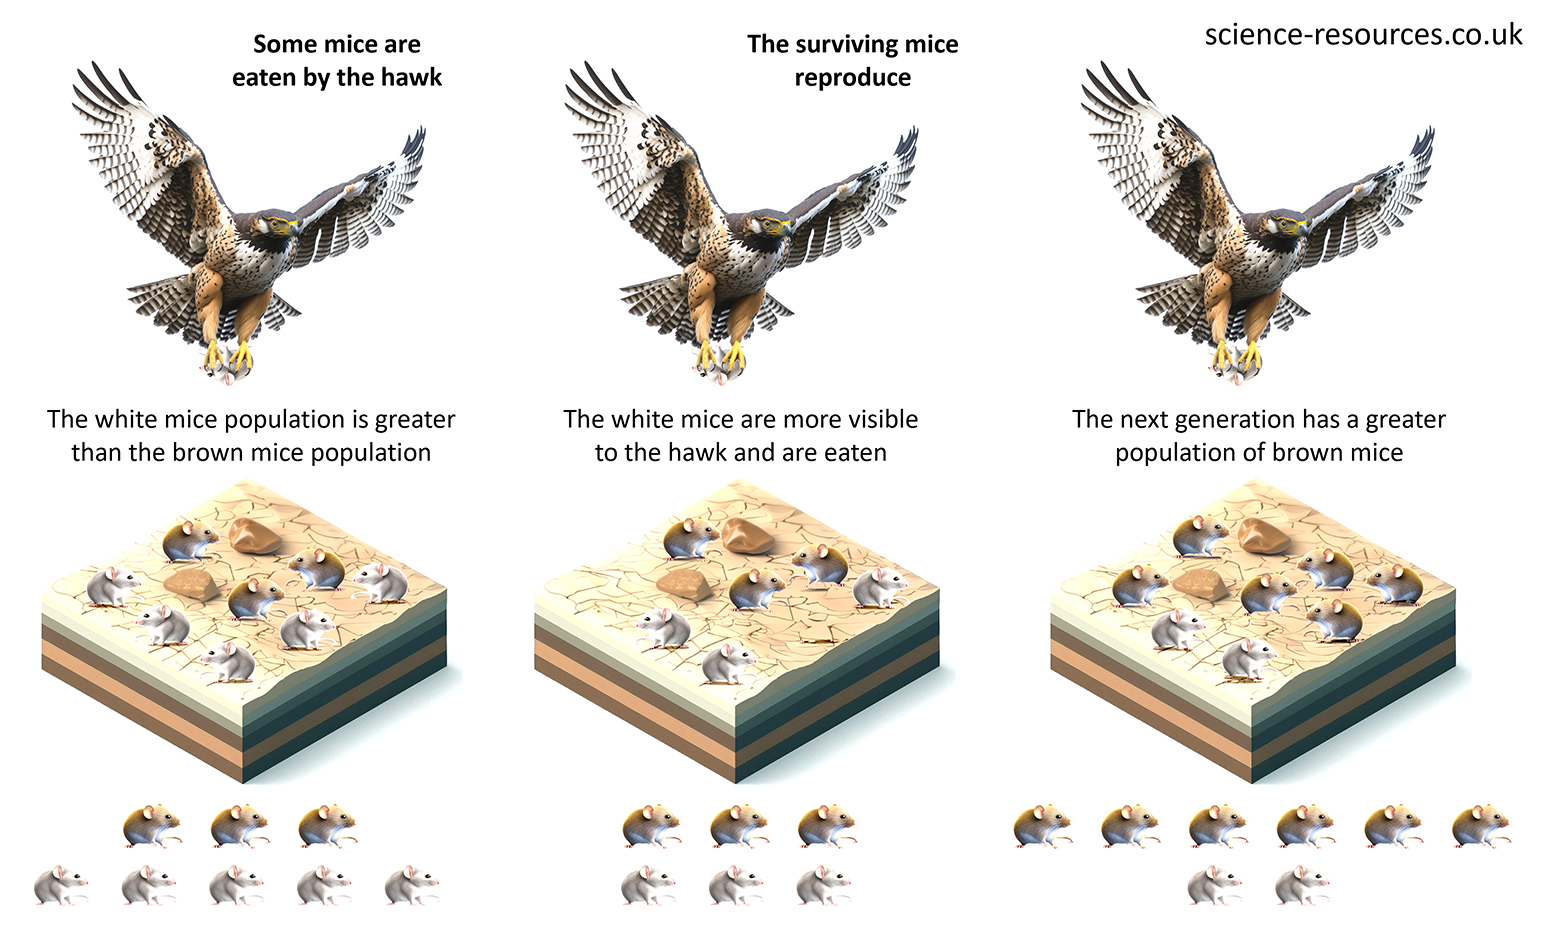 This image illustrates the concept of natural selection using a hawk and two populations of mice, white and brown. It shows how the more visible white mice are more likely to be preyed upon by the hawk, leading to an increase in the population of brown mice over generations.